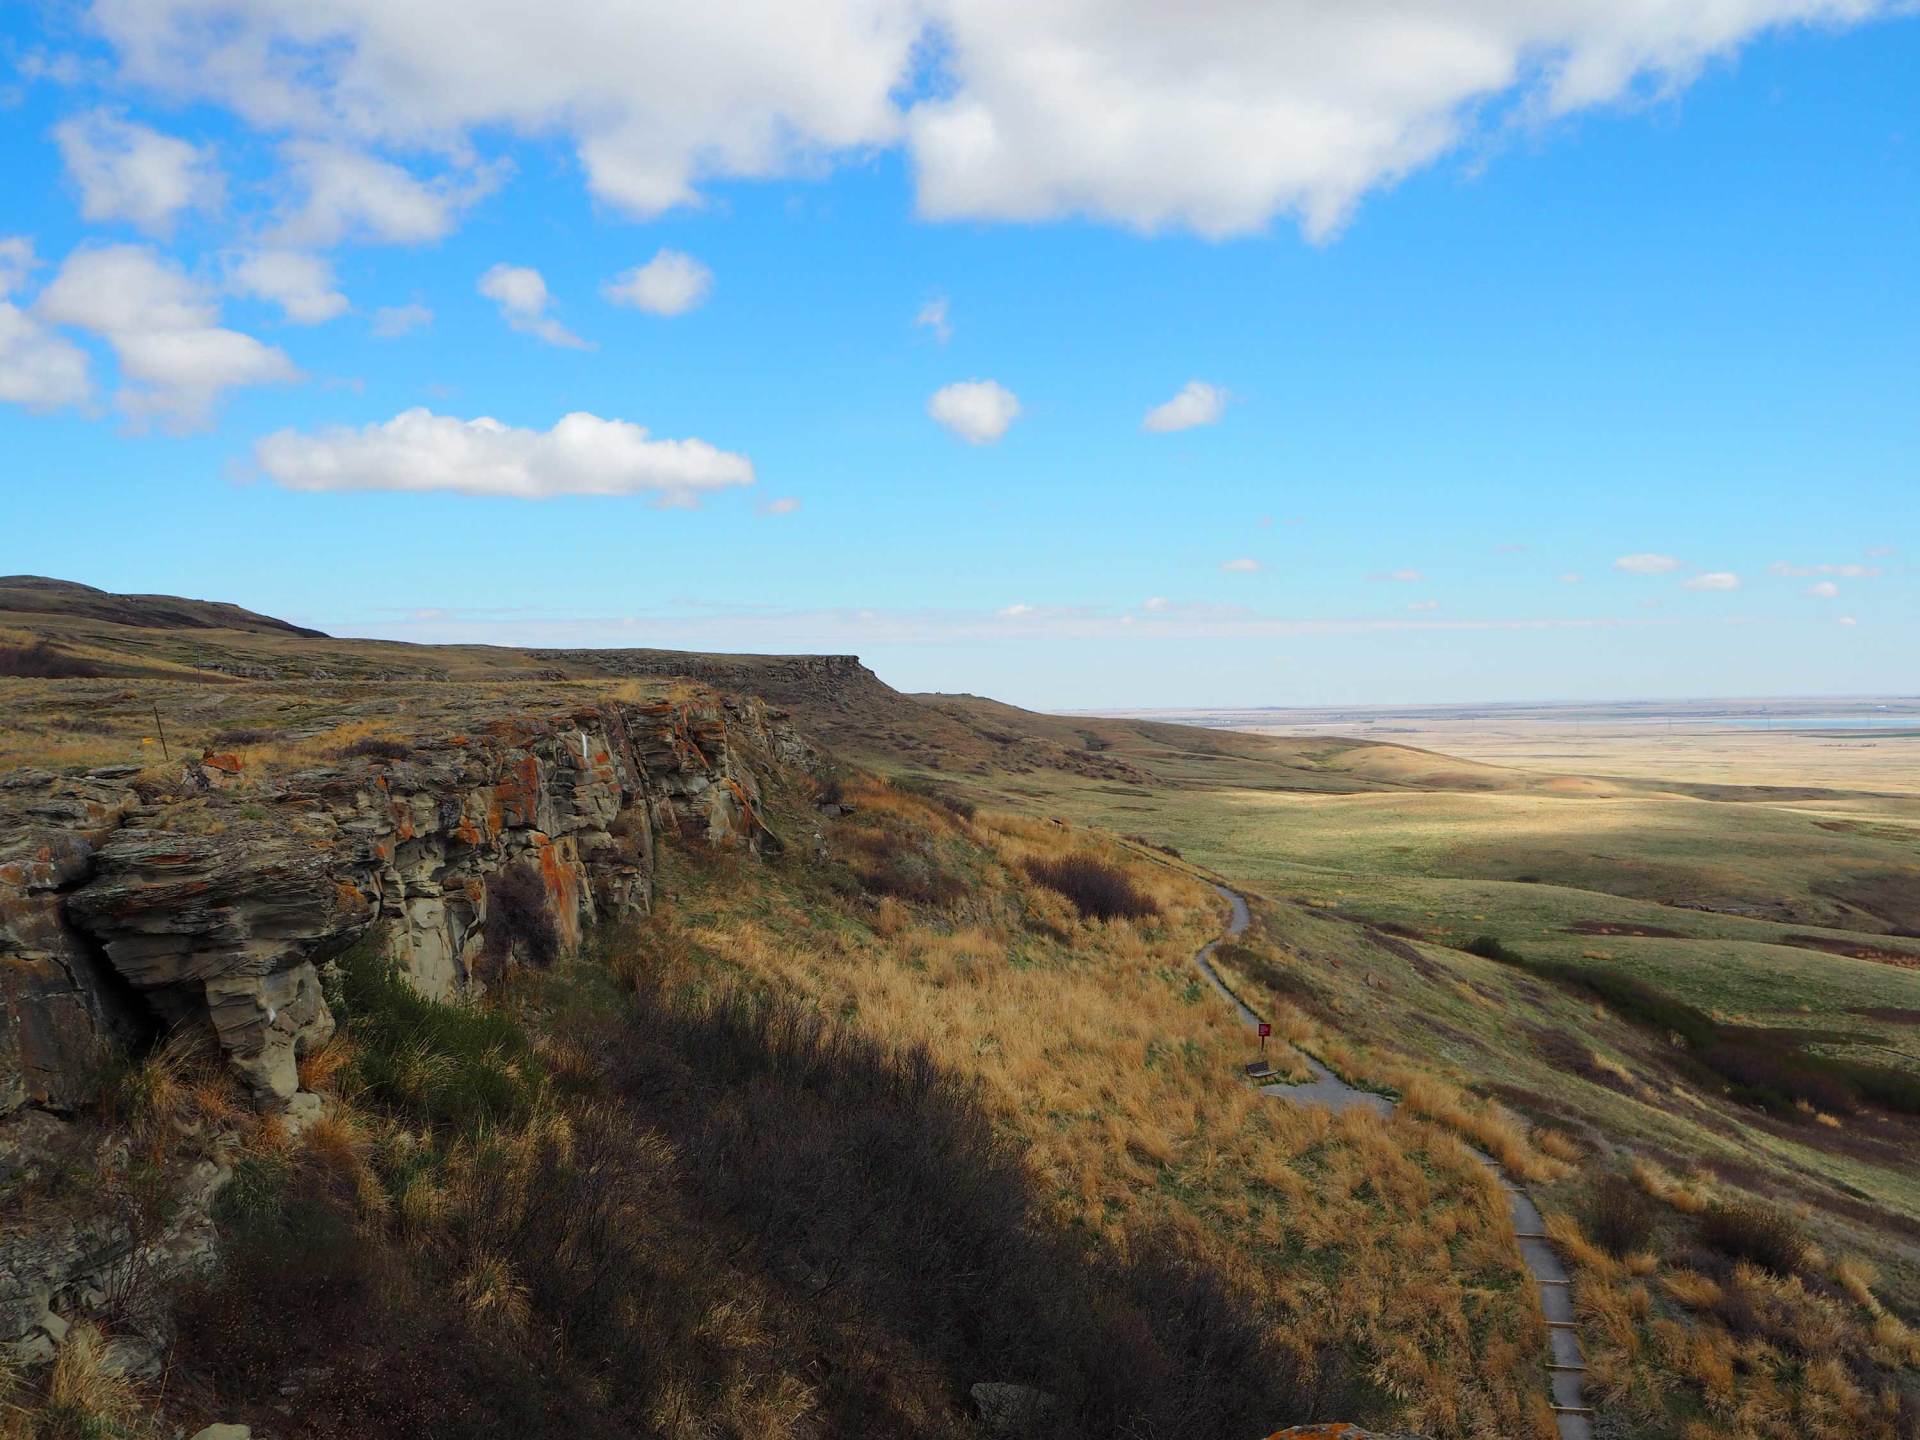 Looking out over the cliffs of Head-Smashed-In Buffalo Jump